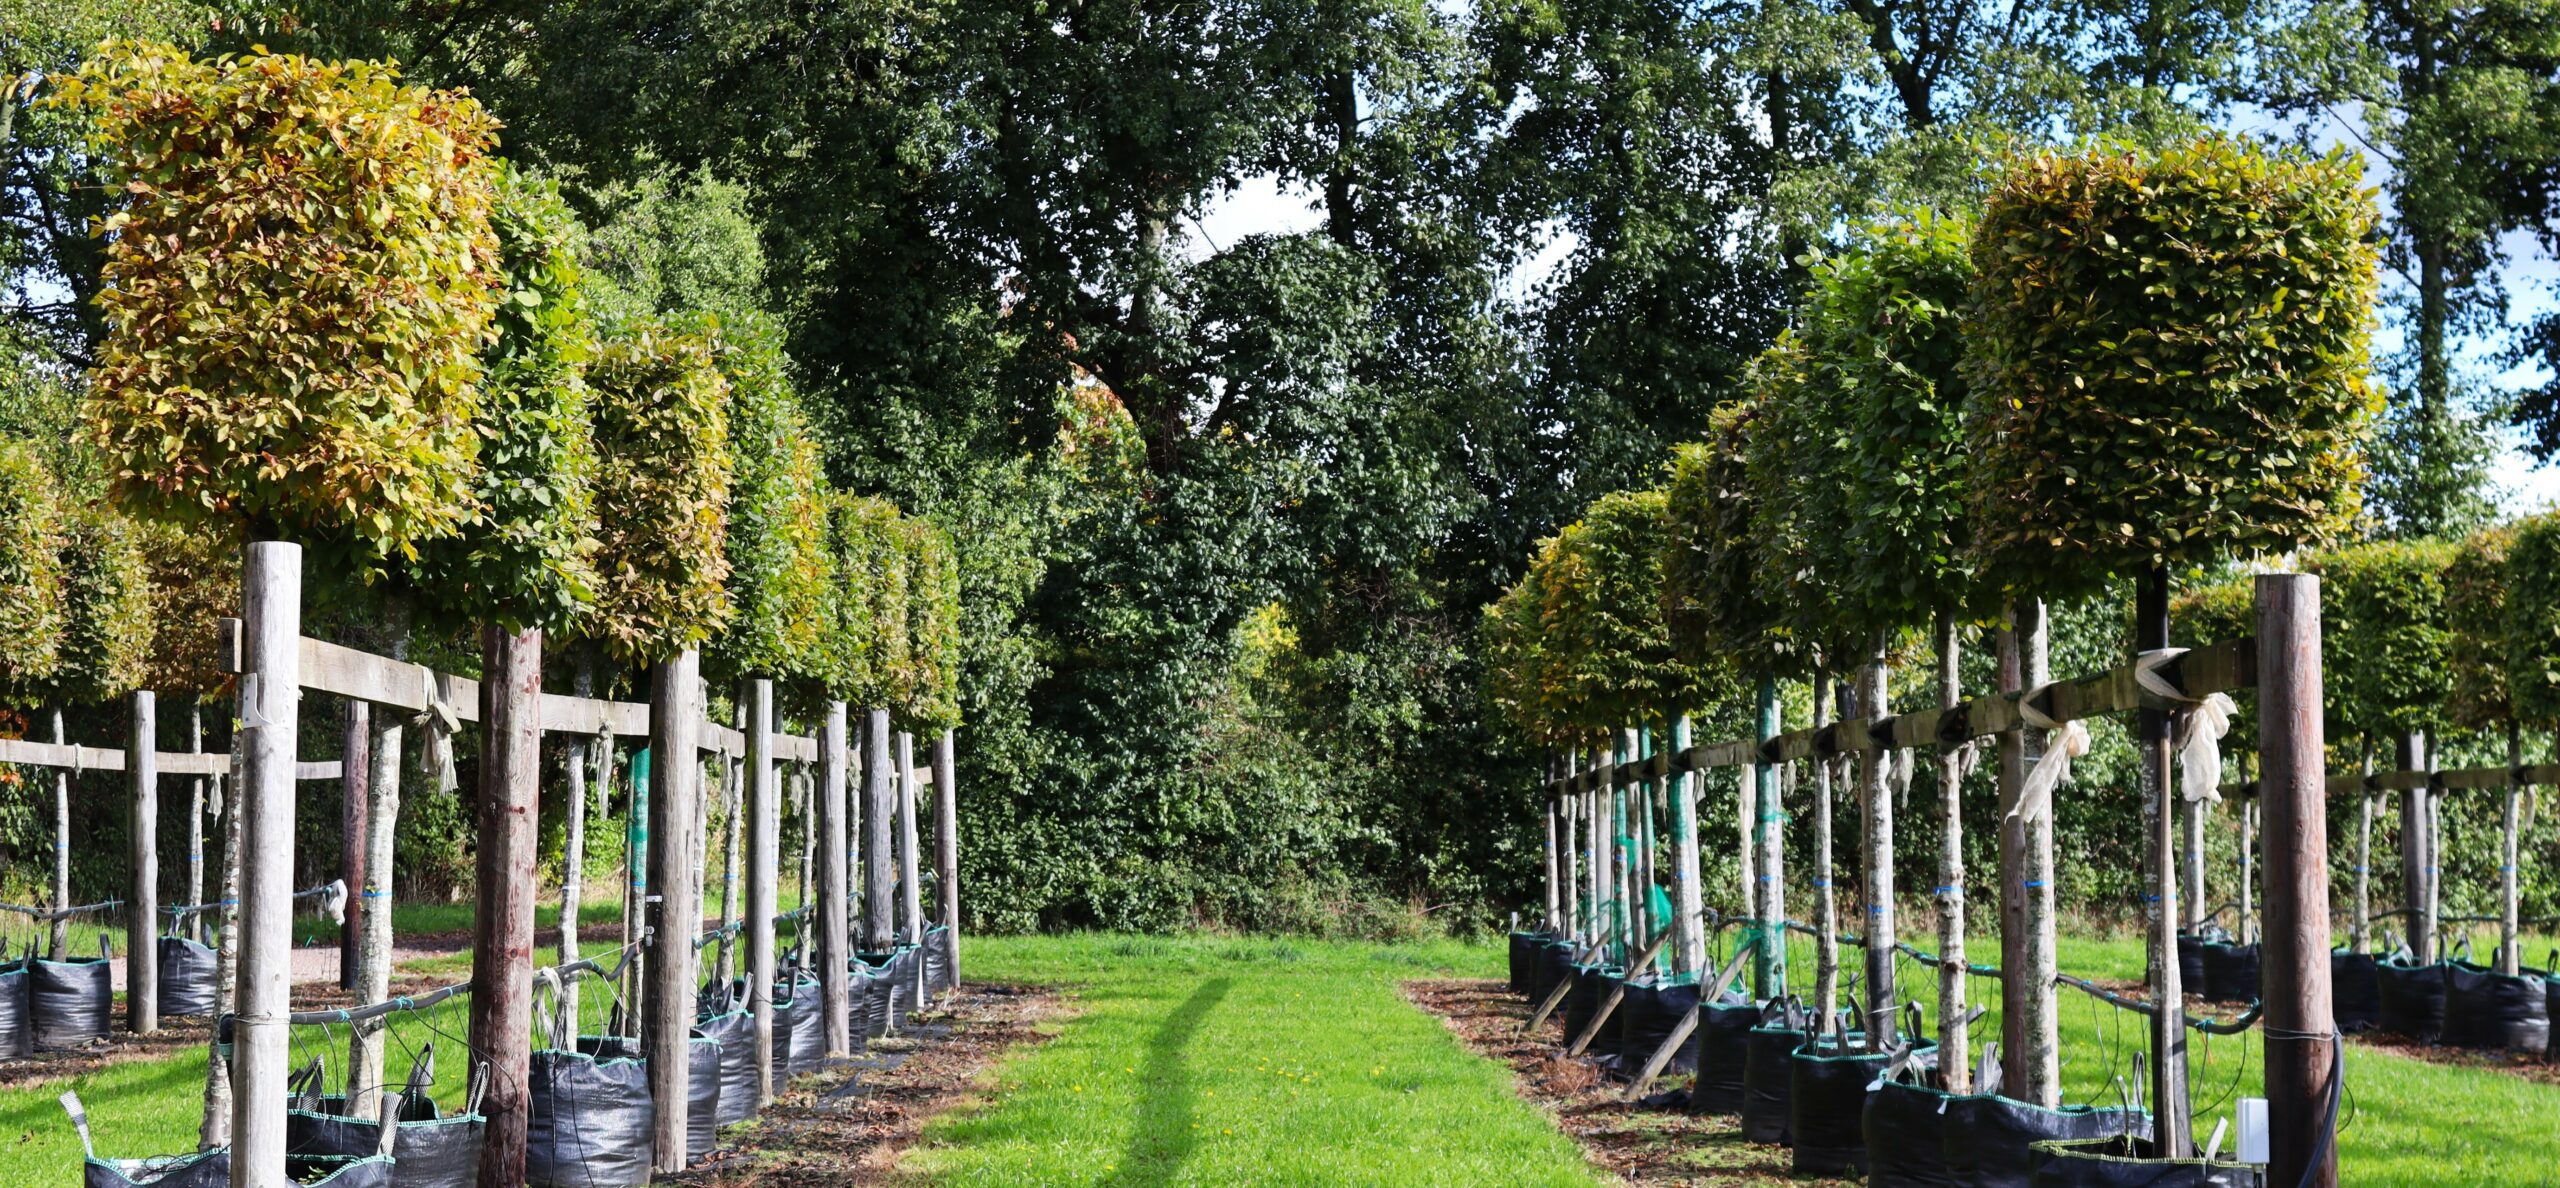 Carpinus betulus trees growing in containers